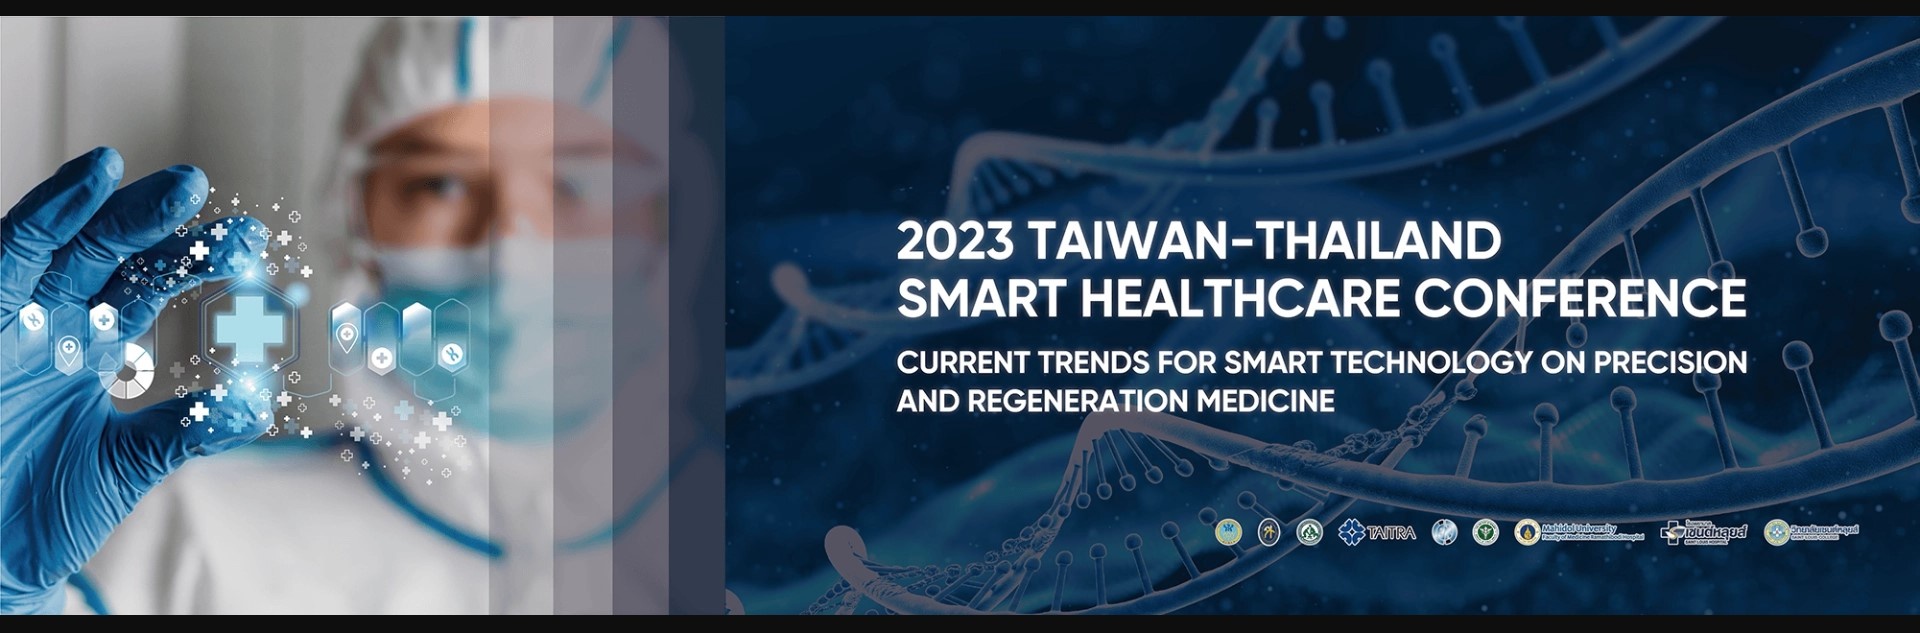 Announcement: 2023 Taiwan - Thailand Smart Healthcare Conference